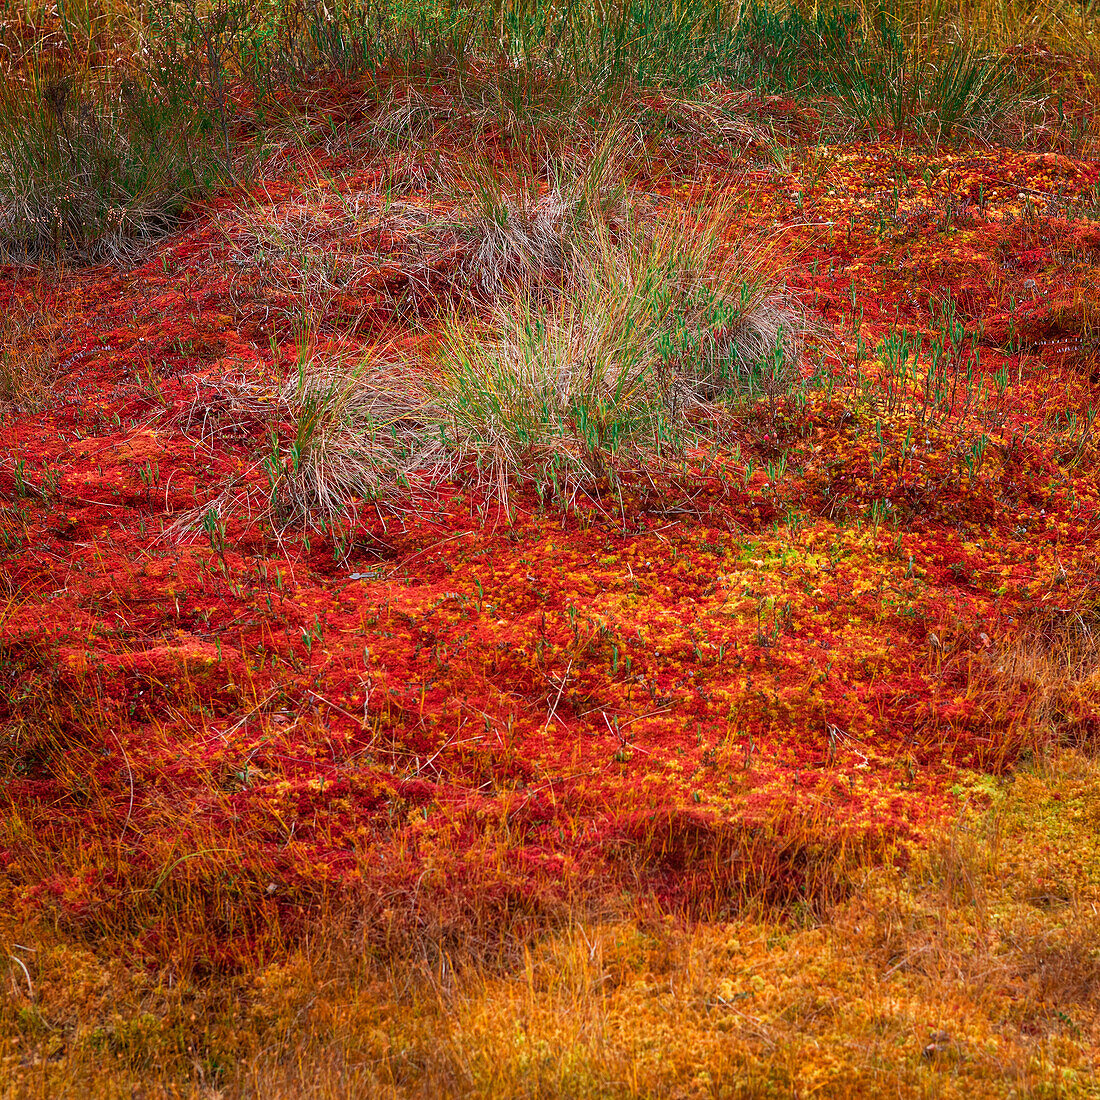 Yellow and red colored mosses in autumn in the Tyresta National Park in Sweden